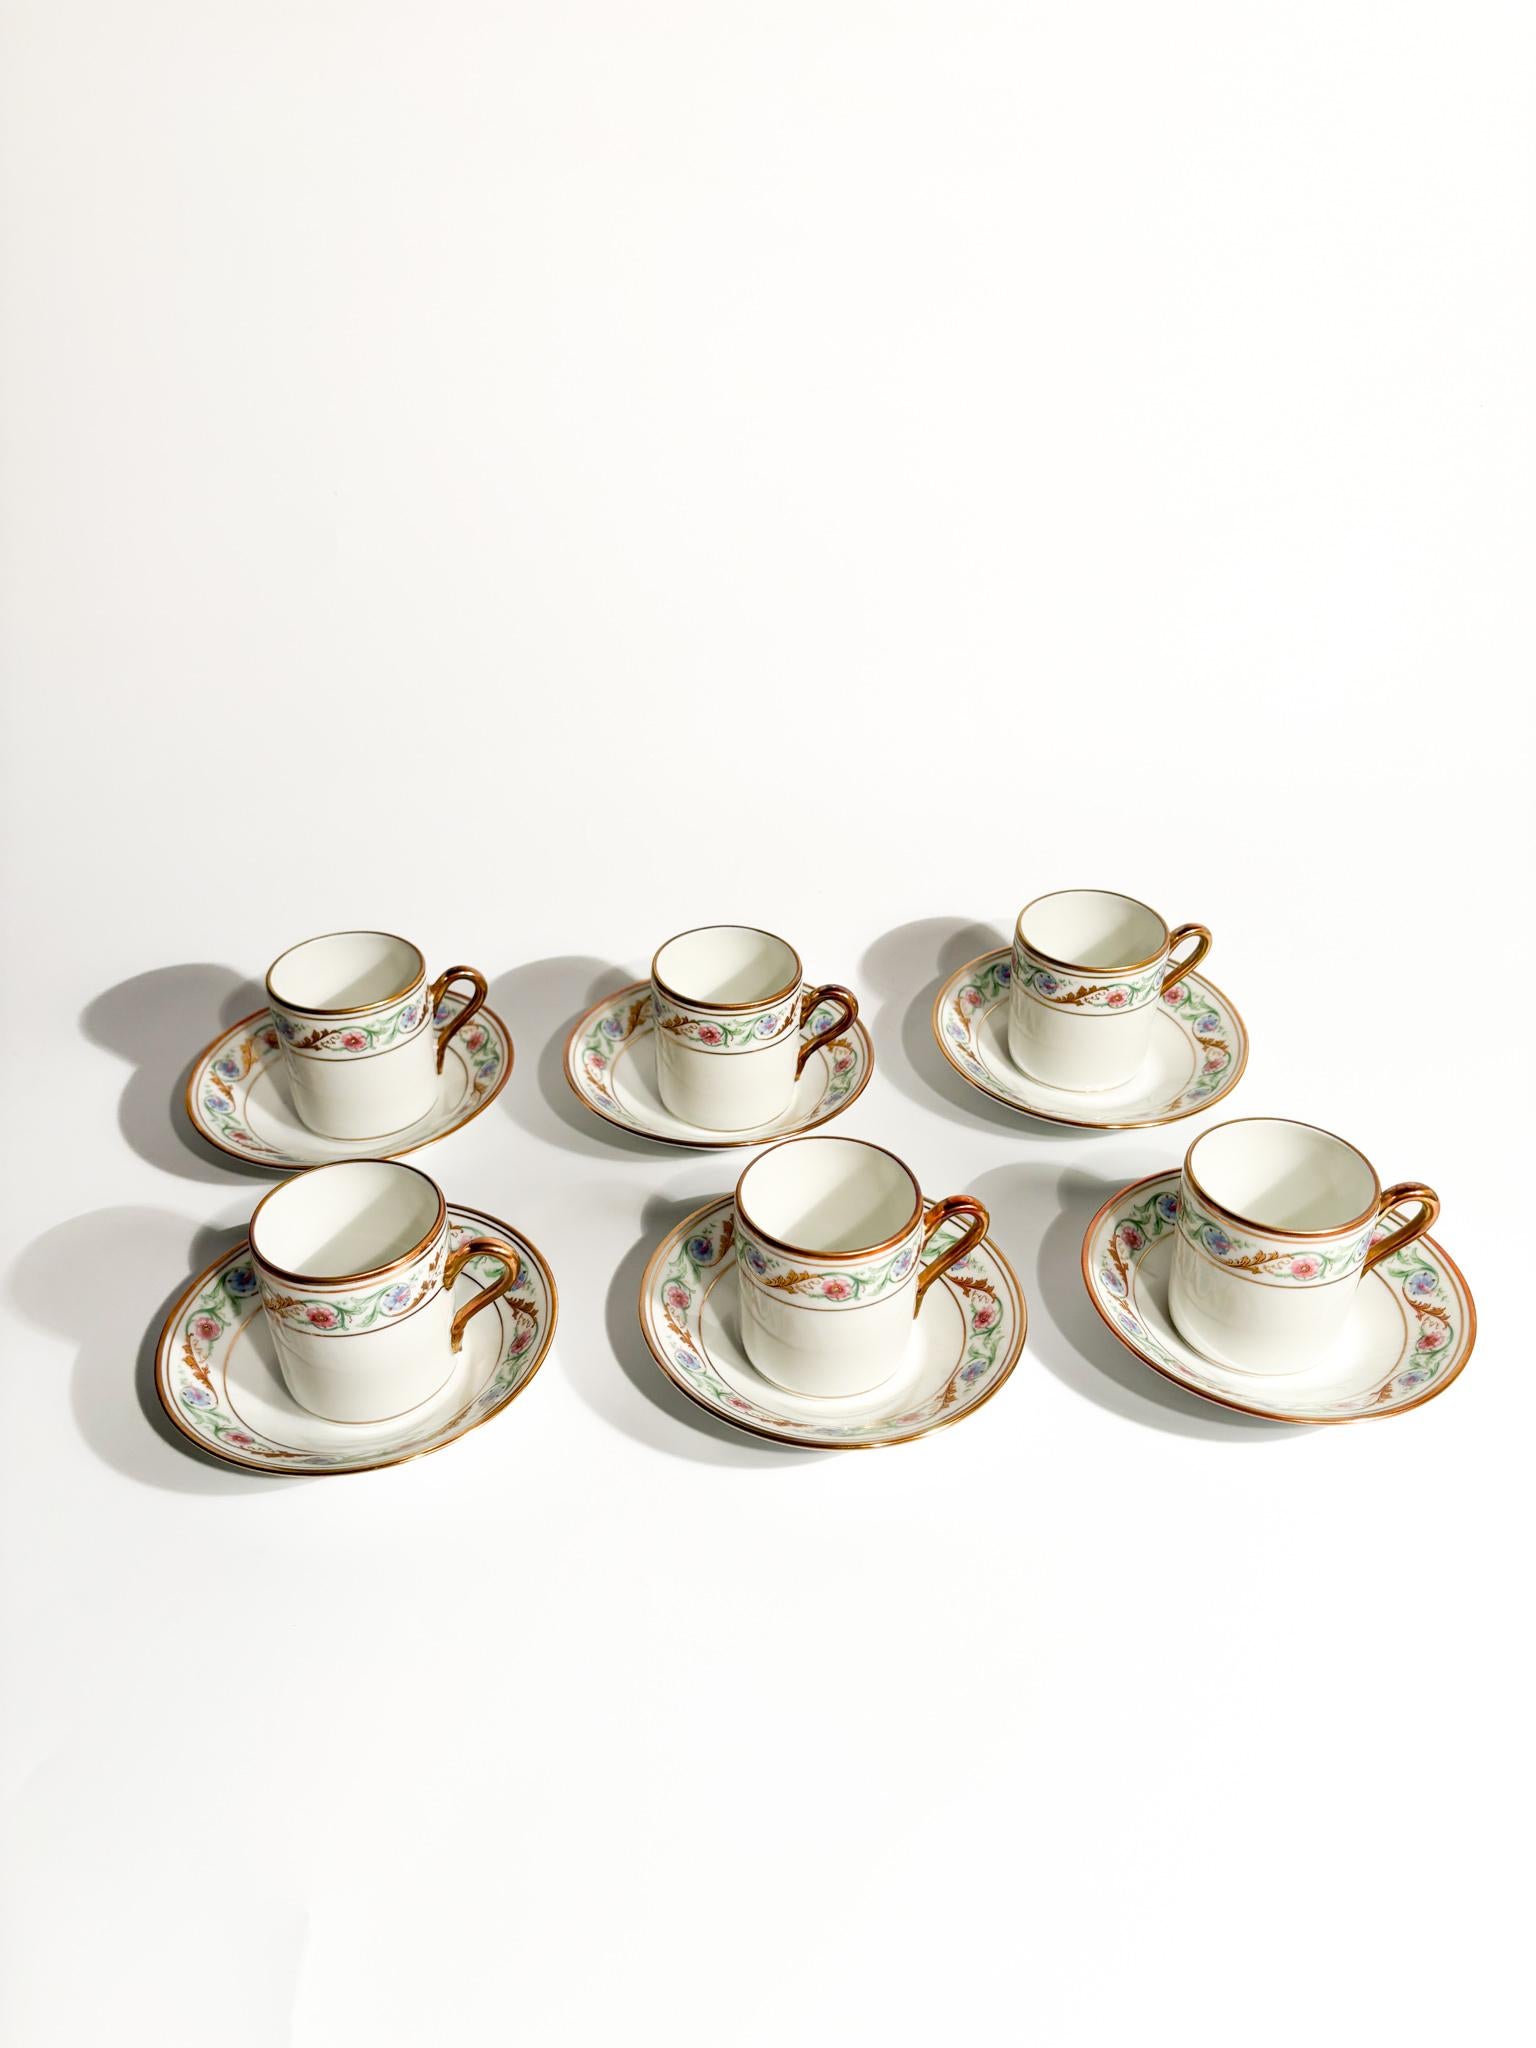 Set of 6 hand-painted porcelain coffee cups by Ginori Doccia, Pittoria manufacture, made in the 1940s

Saucer: Ø cm 11

Ginori 1735 is an Italian luxury goods company founded in 1735 by Carlo Ginori. The company is known for its high-quality